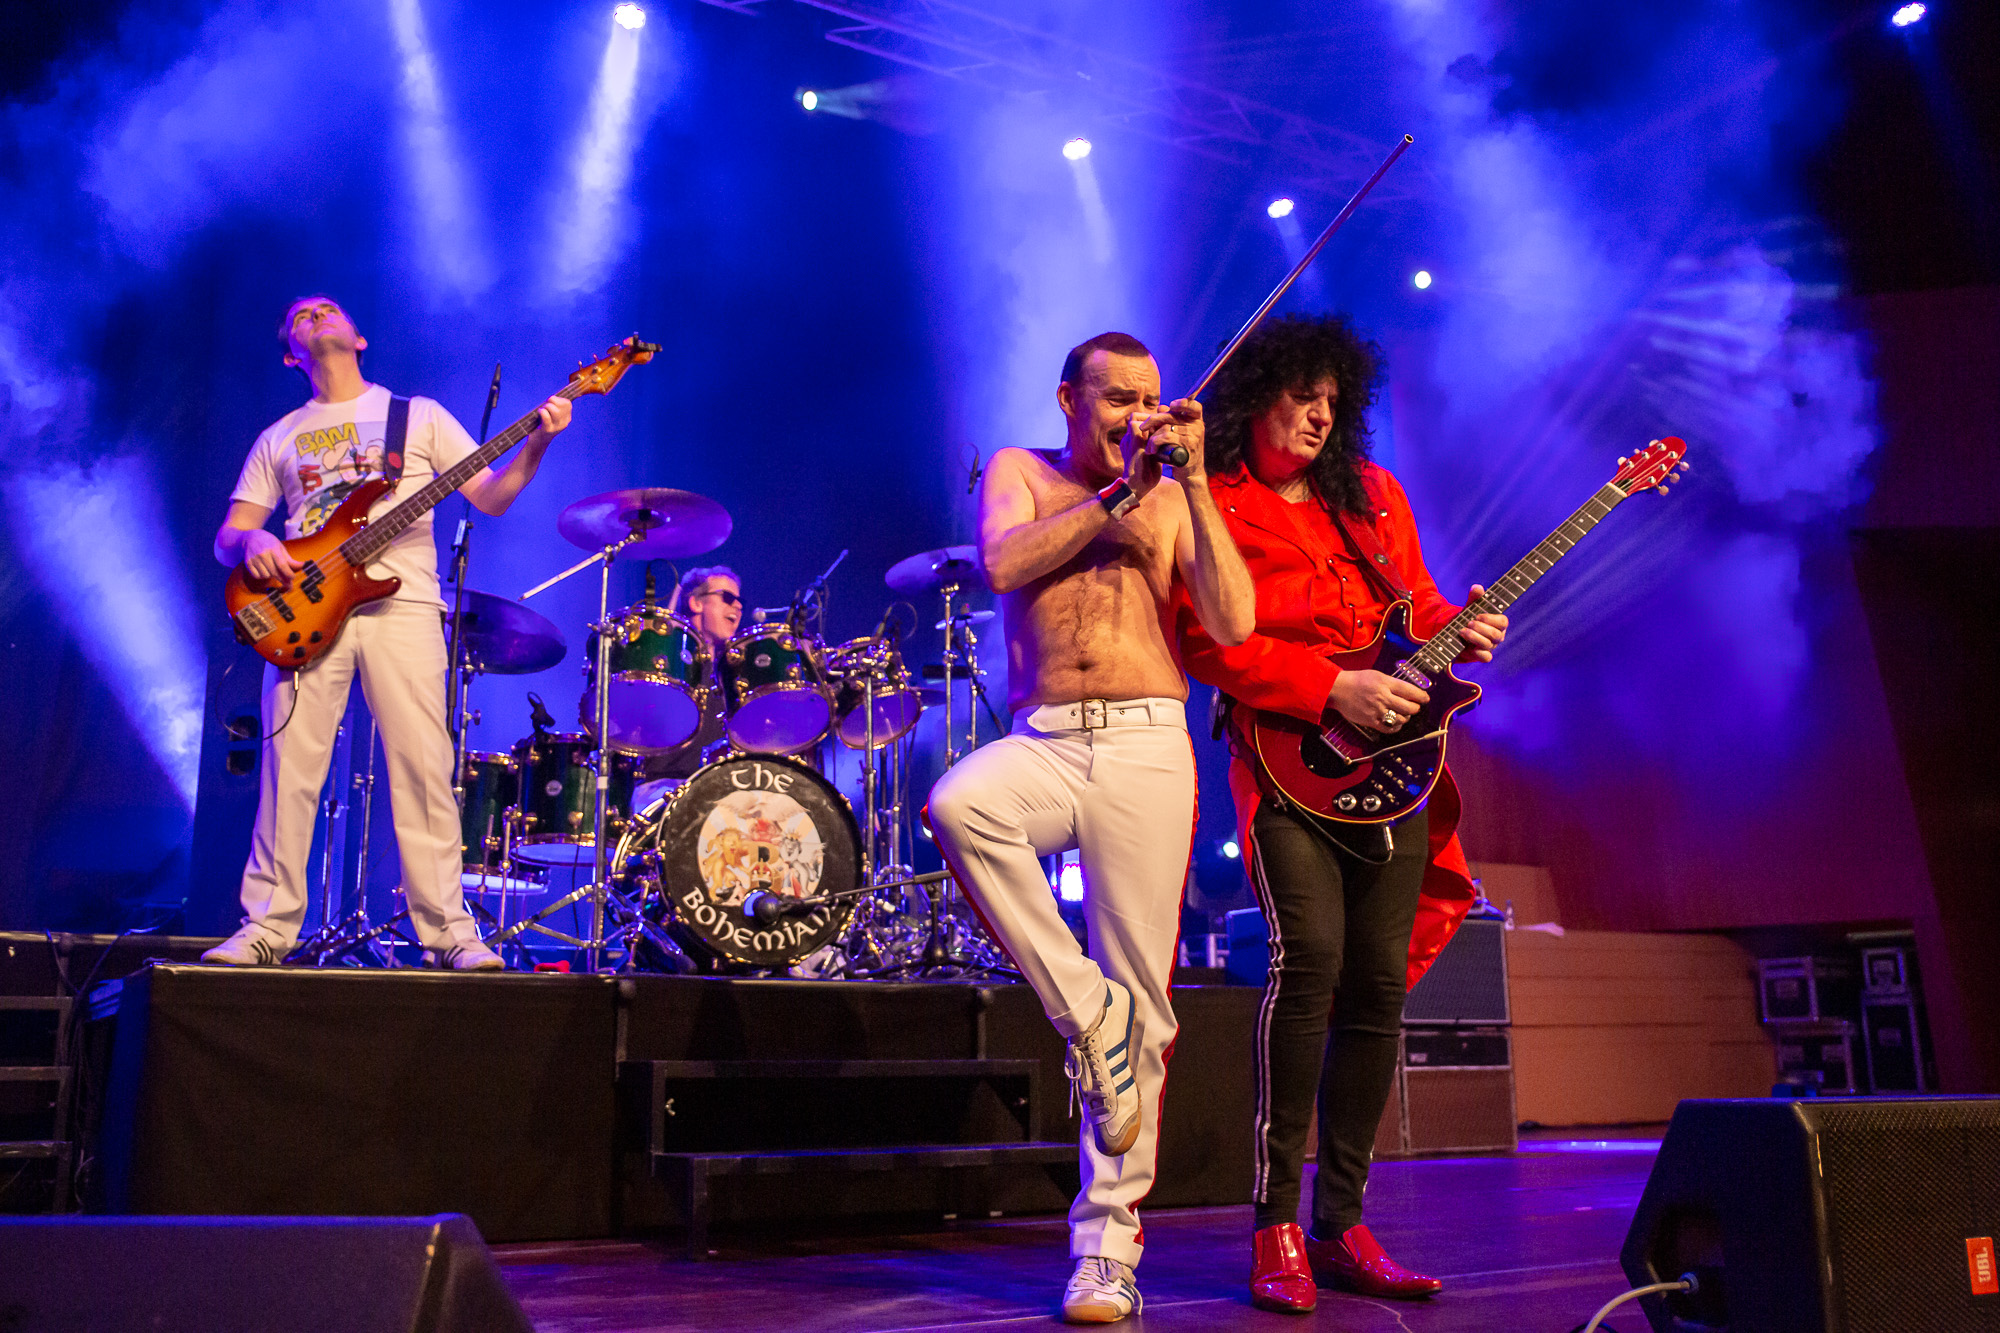 A Night of Queen with The Bohemians